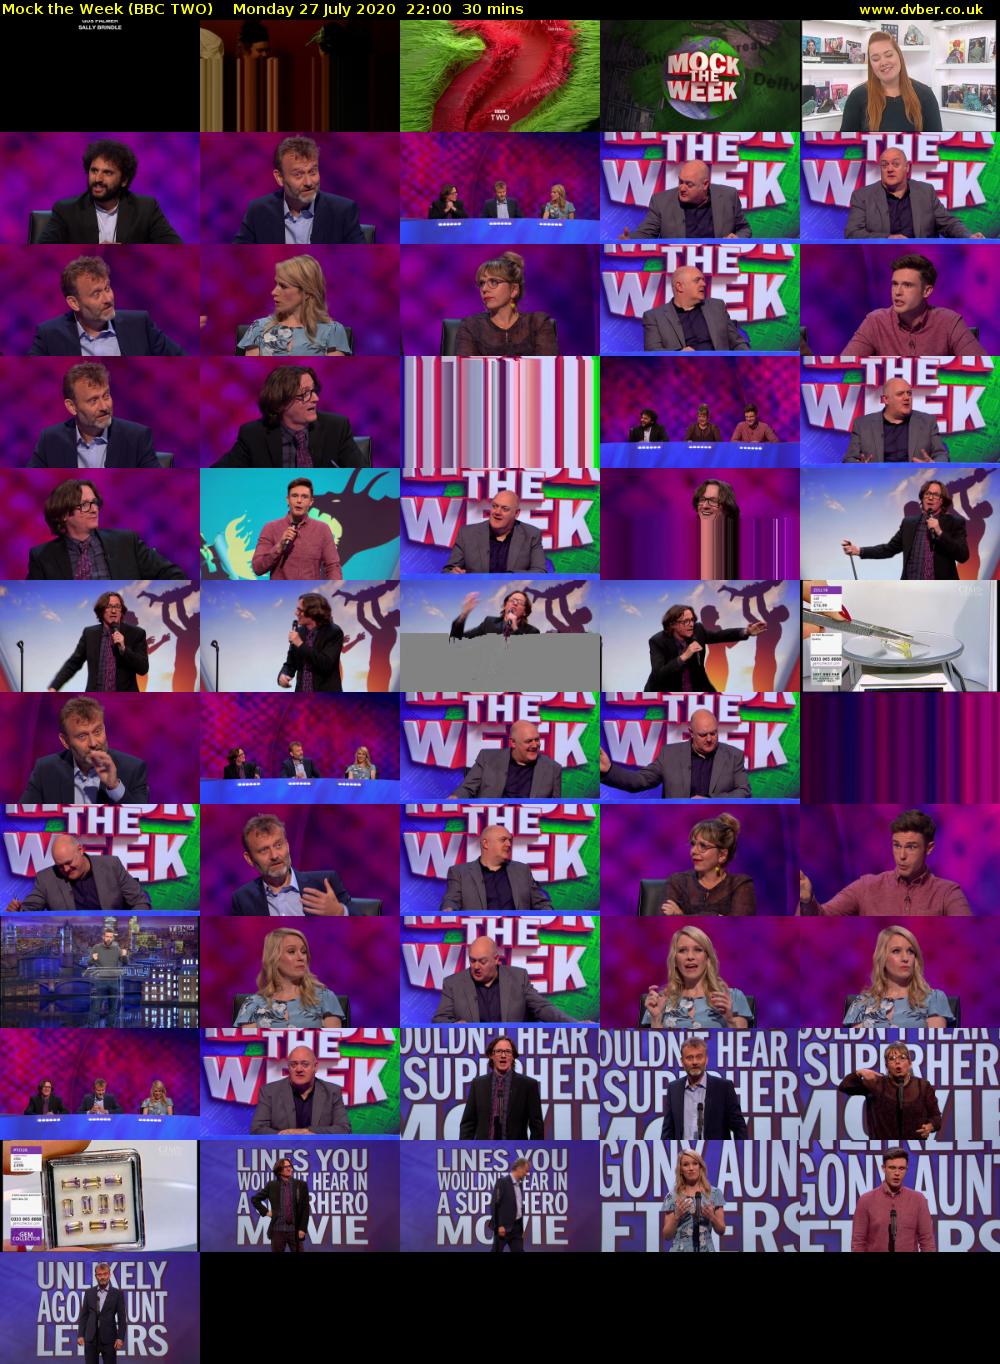 Mock the Week (BBC TWO) Monday 27 July 2020 22:00 - 22:30